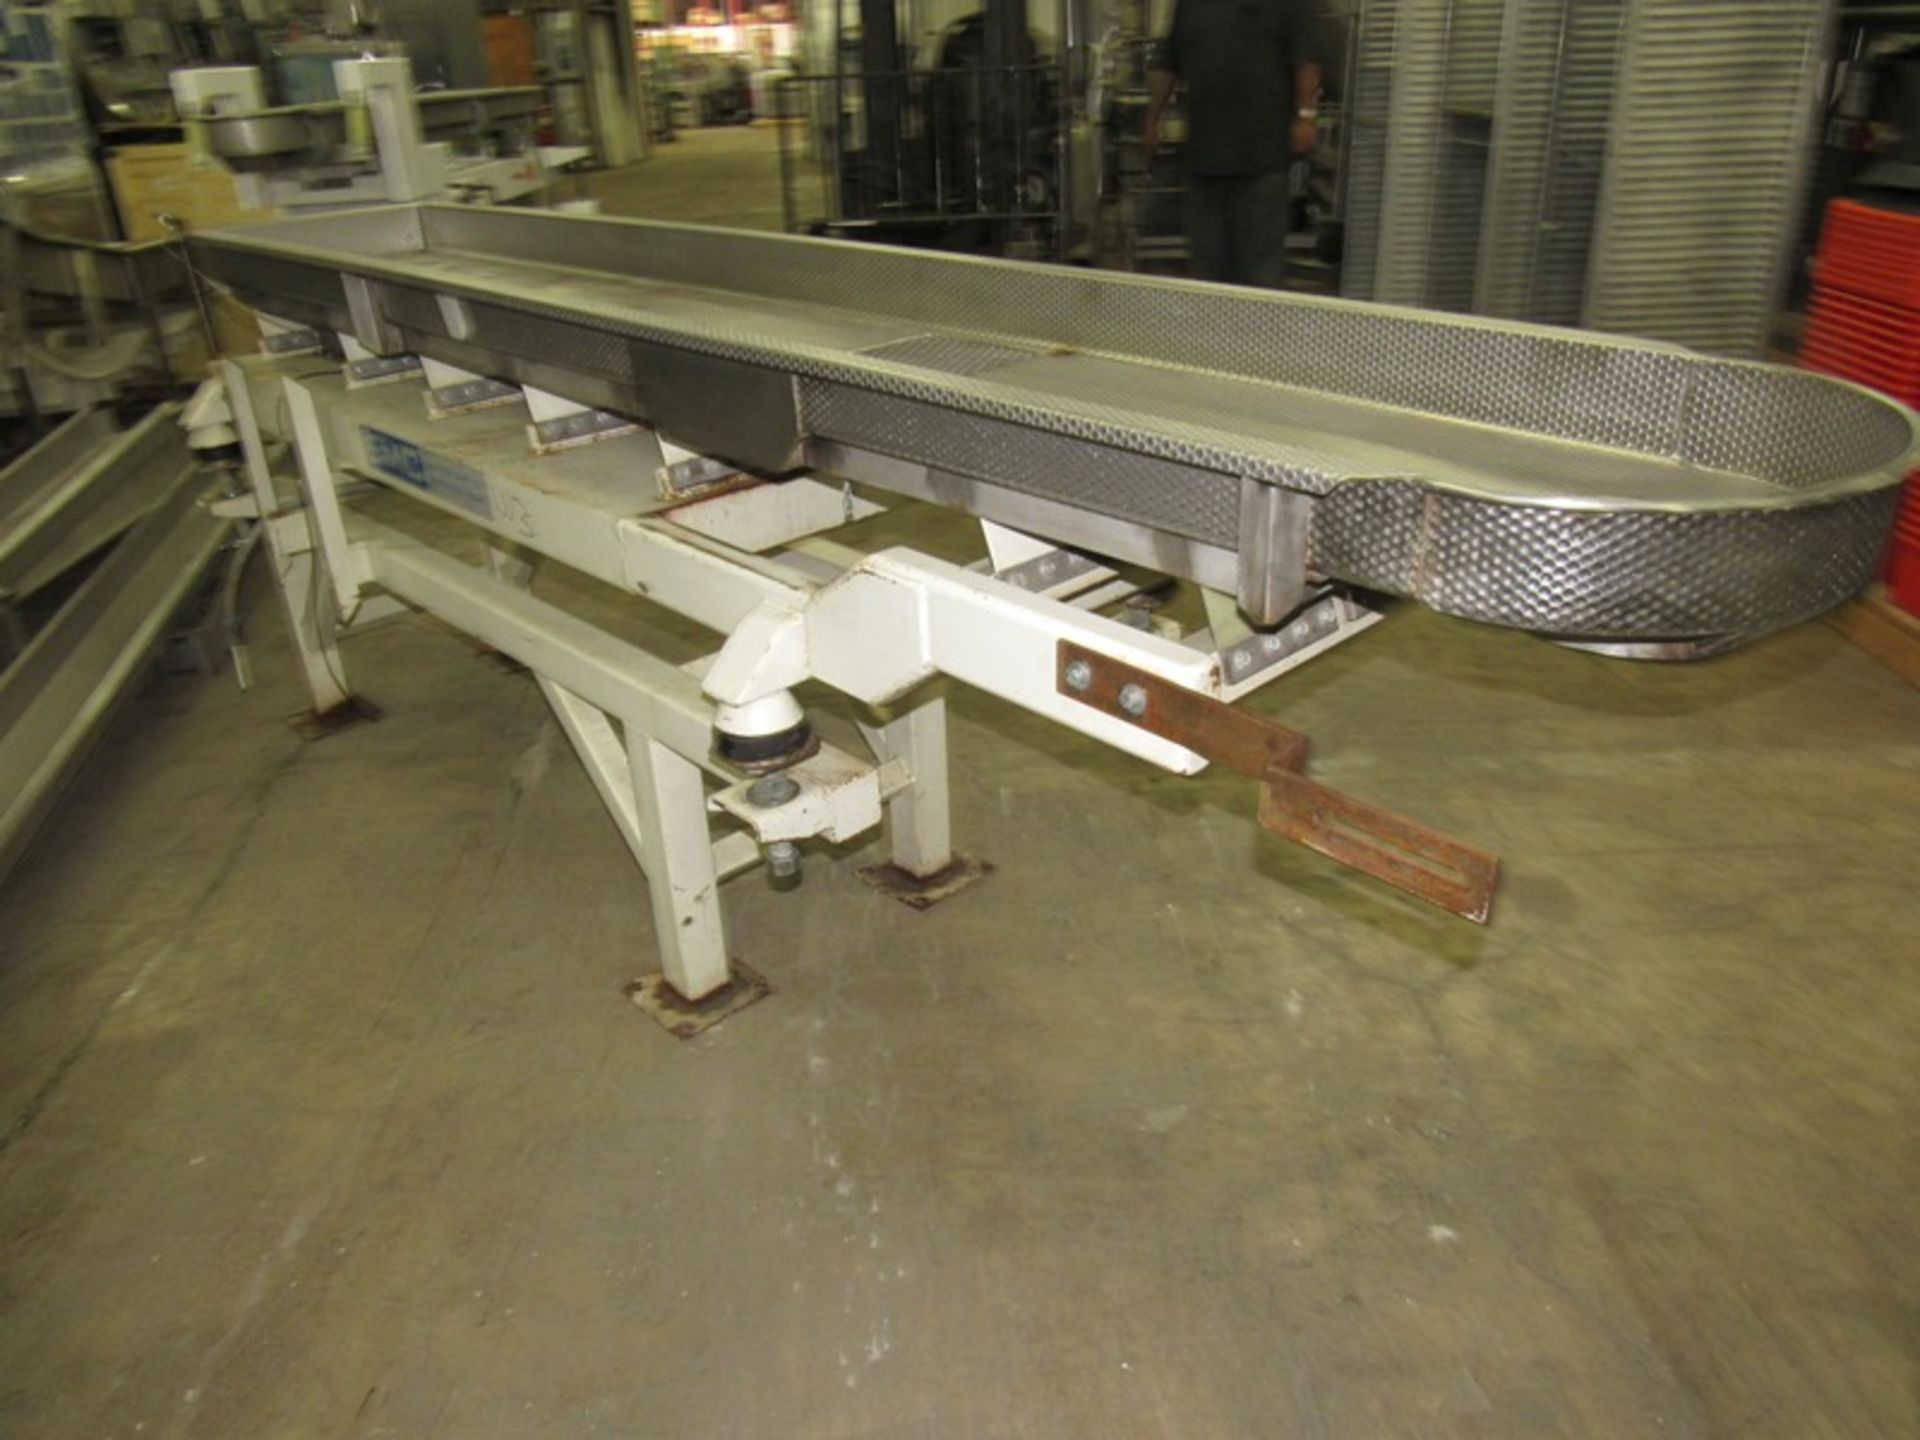 Smalley Mdl. EMC2t Vibratory Conveyor, dimpled stainless steel tray, 18" W X 115" L X 4" D, 9" - Image 3 of 6